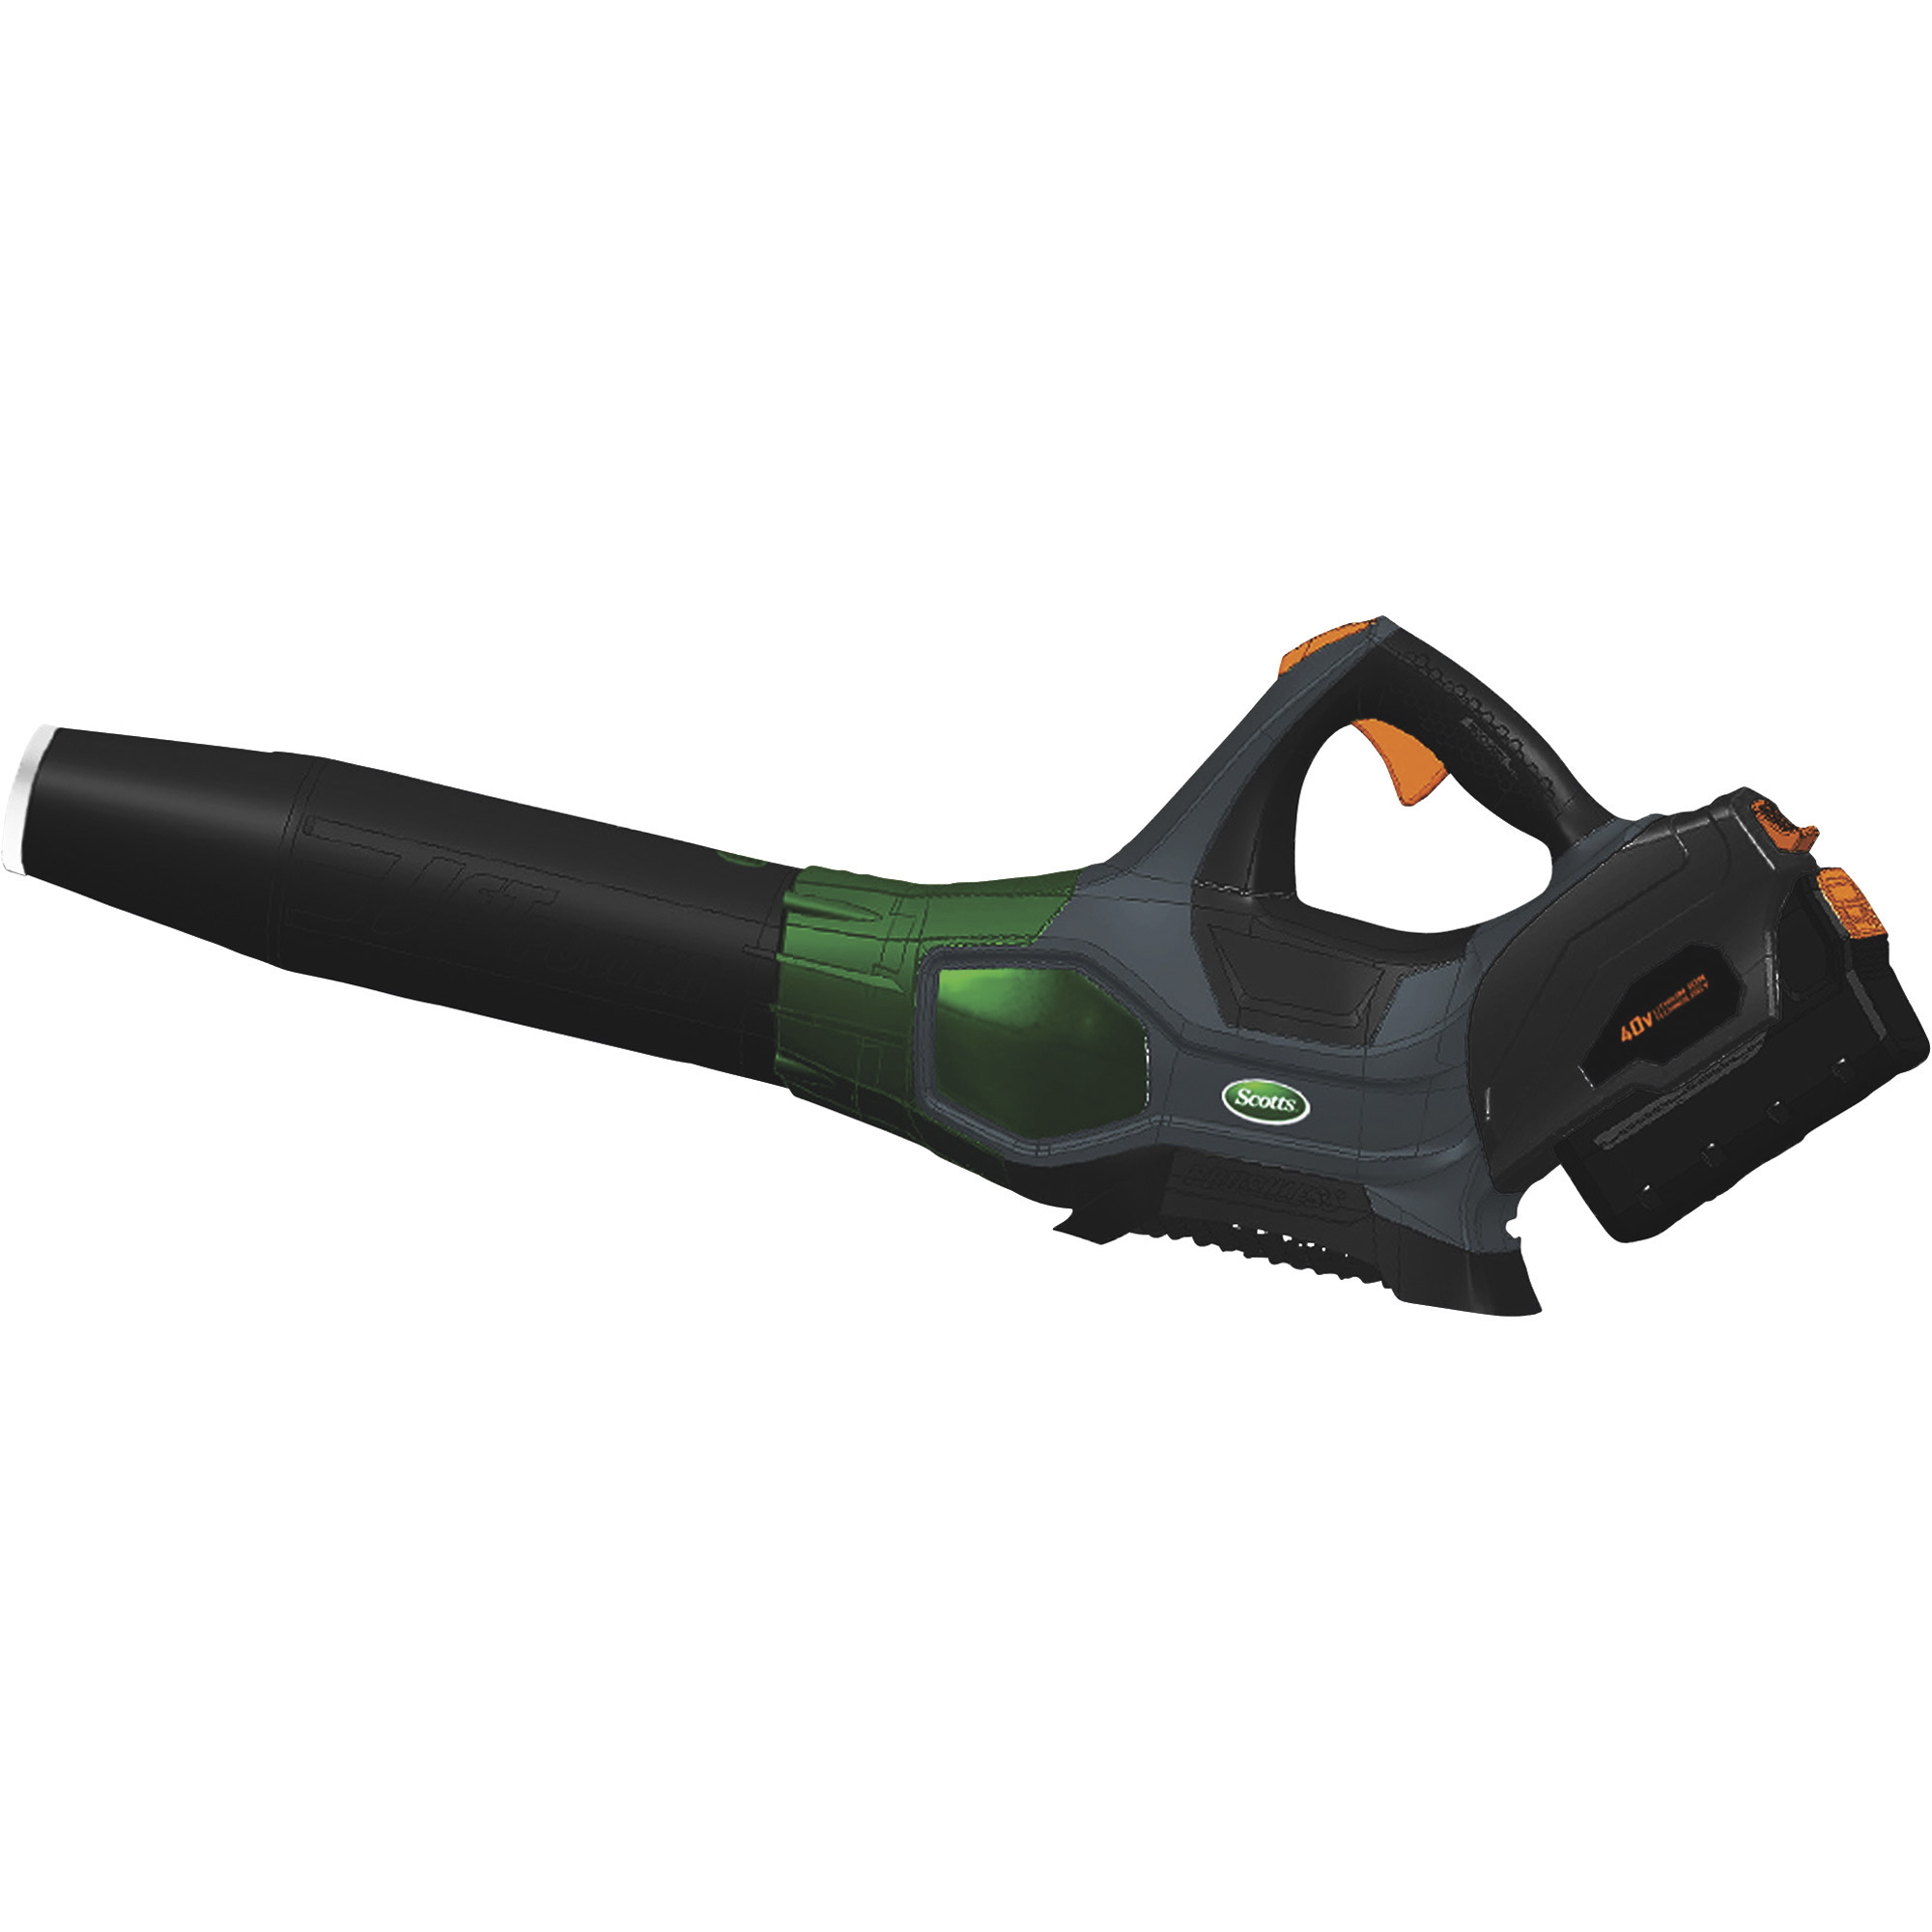 40-Volt Cordless Sweeper/Blower, 120 MPH, Lithium-Ion Battery